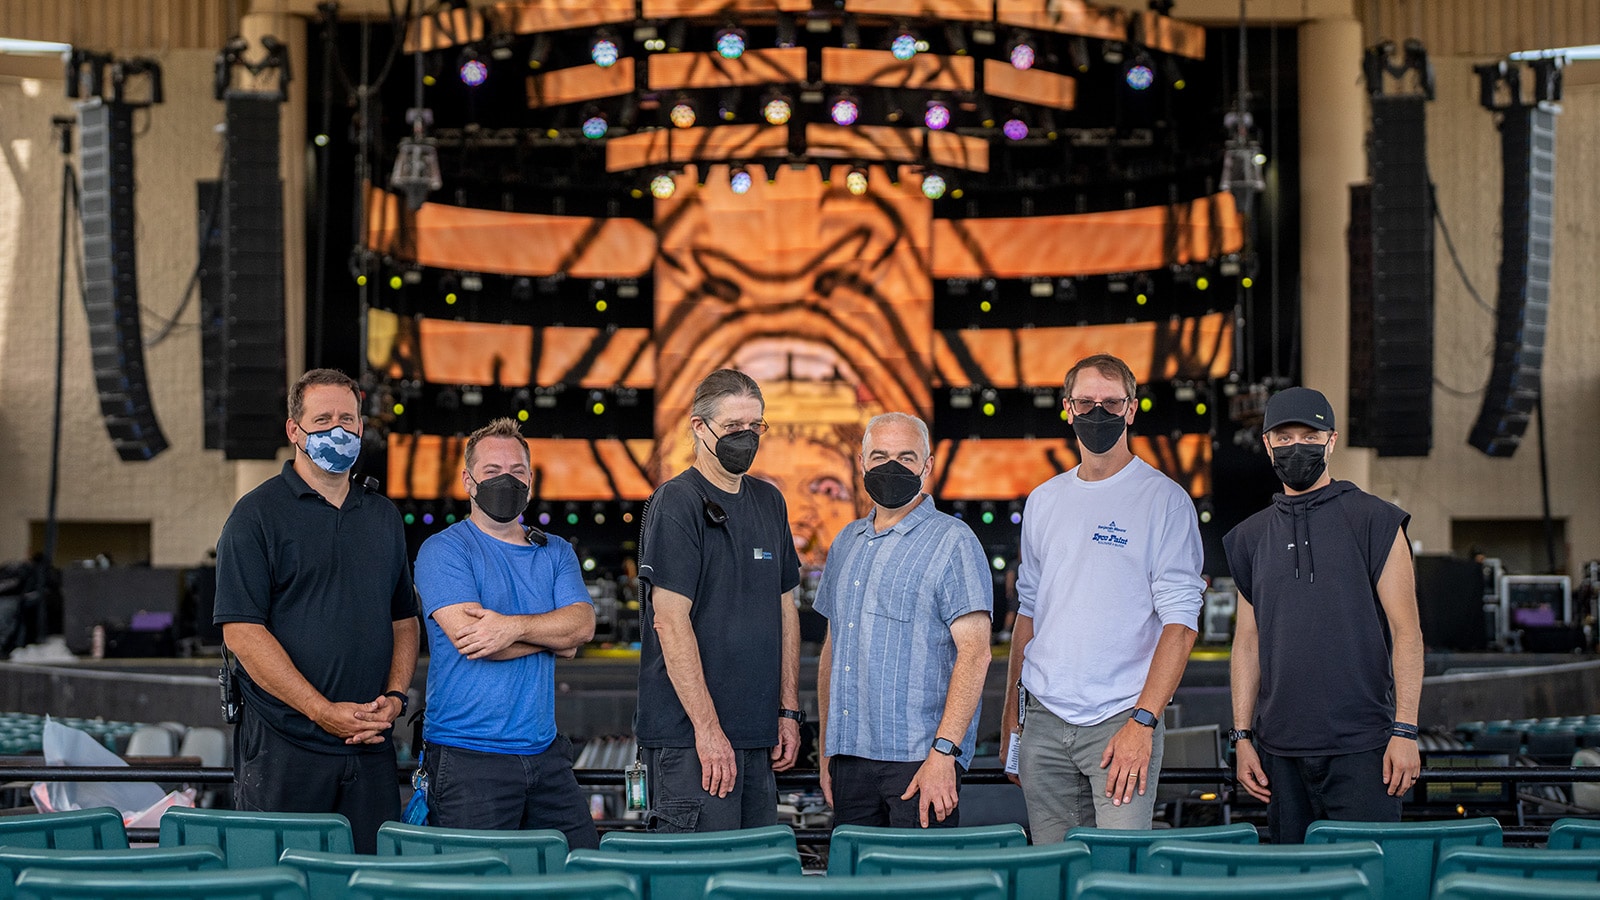 (L-R) Paul White, PA Tech; Jeremy Miller, System Engineer; Greg Botimer, RF Coordinator/Monitor Tech; Ian Kuhn, Monitor Engineer; Tom Lyon, FOH Engineer; and Josh Horn, Assistant Stage Tech and Sirius/XM Technician 